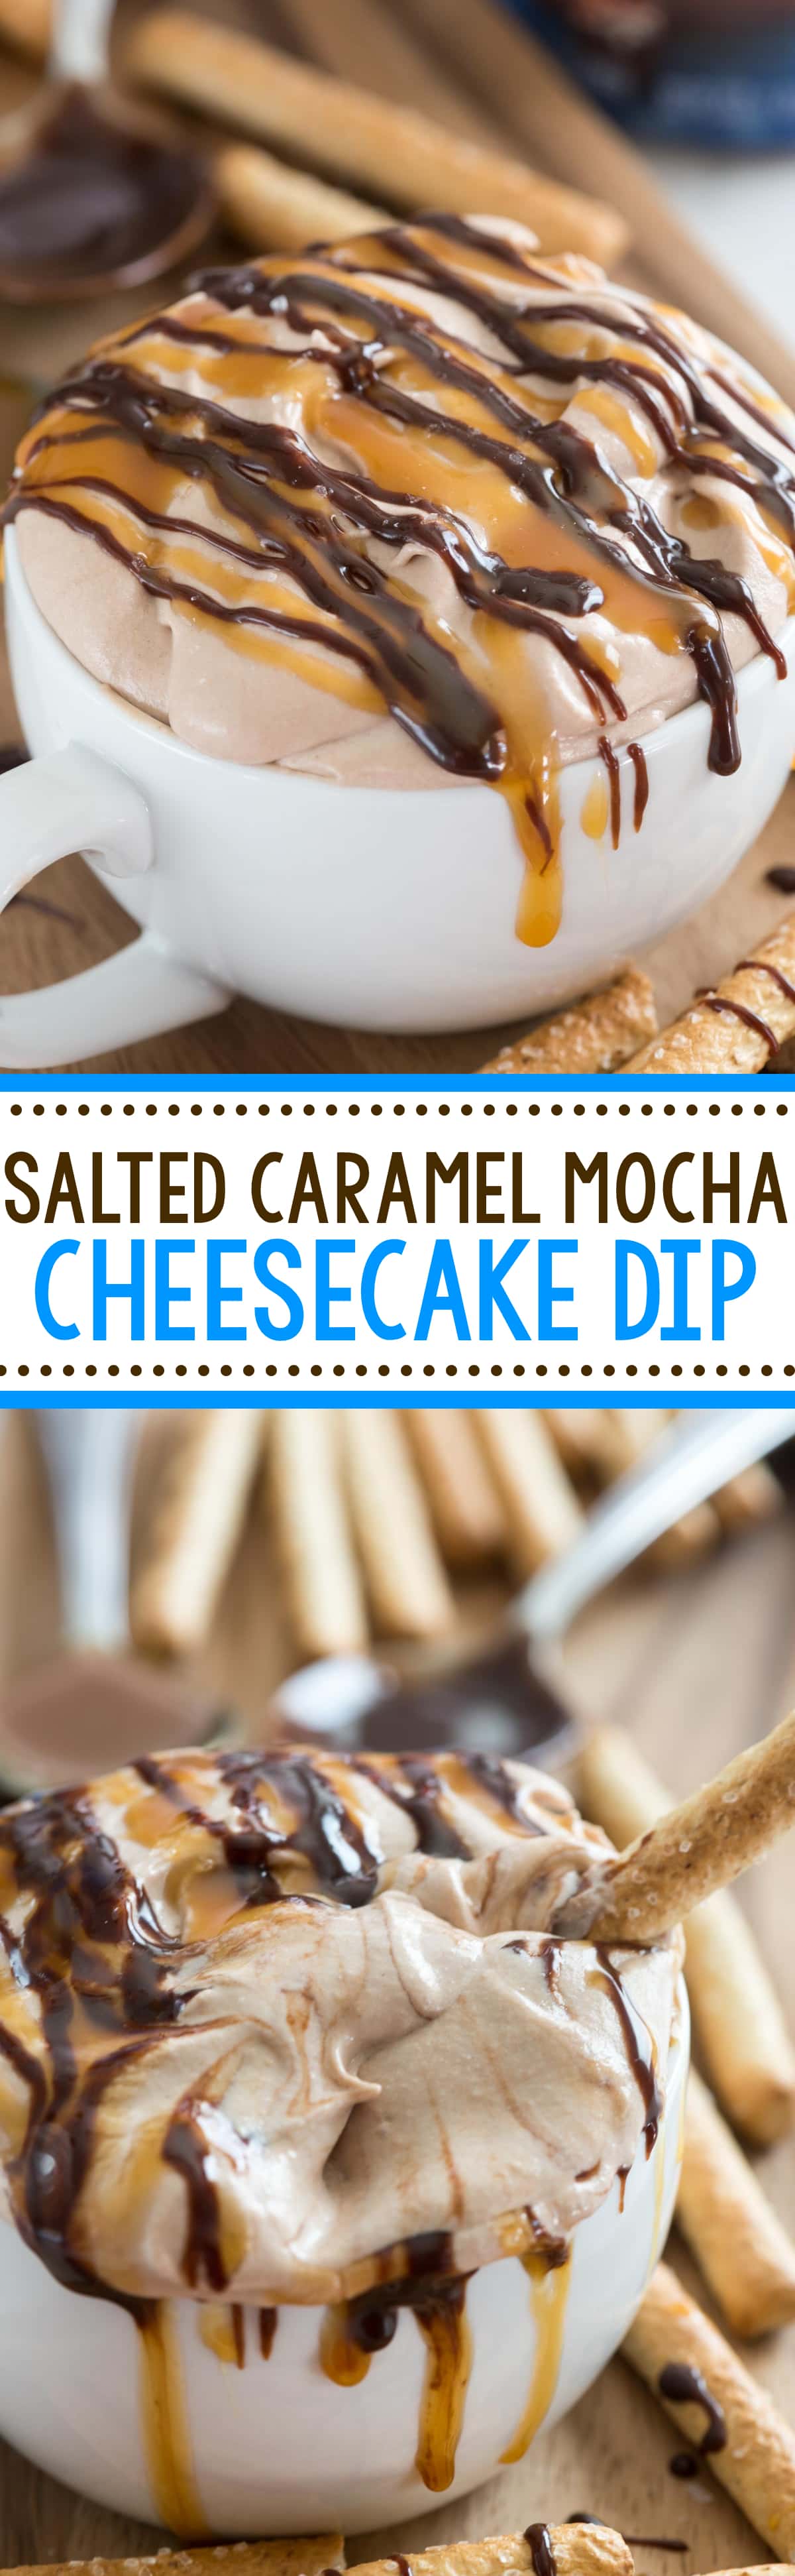 Salted Caramel Mocha Cheesecake Dip - this easy no-bake cheesecake recipe is PERFECT for dipping fruit or pretzels or eating with a spoon. 